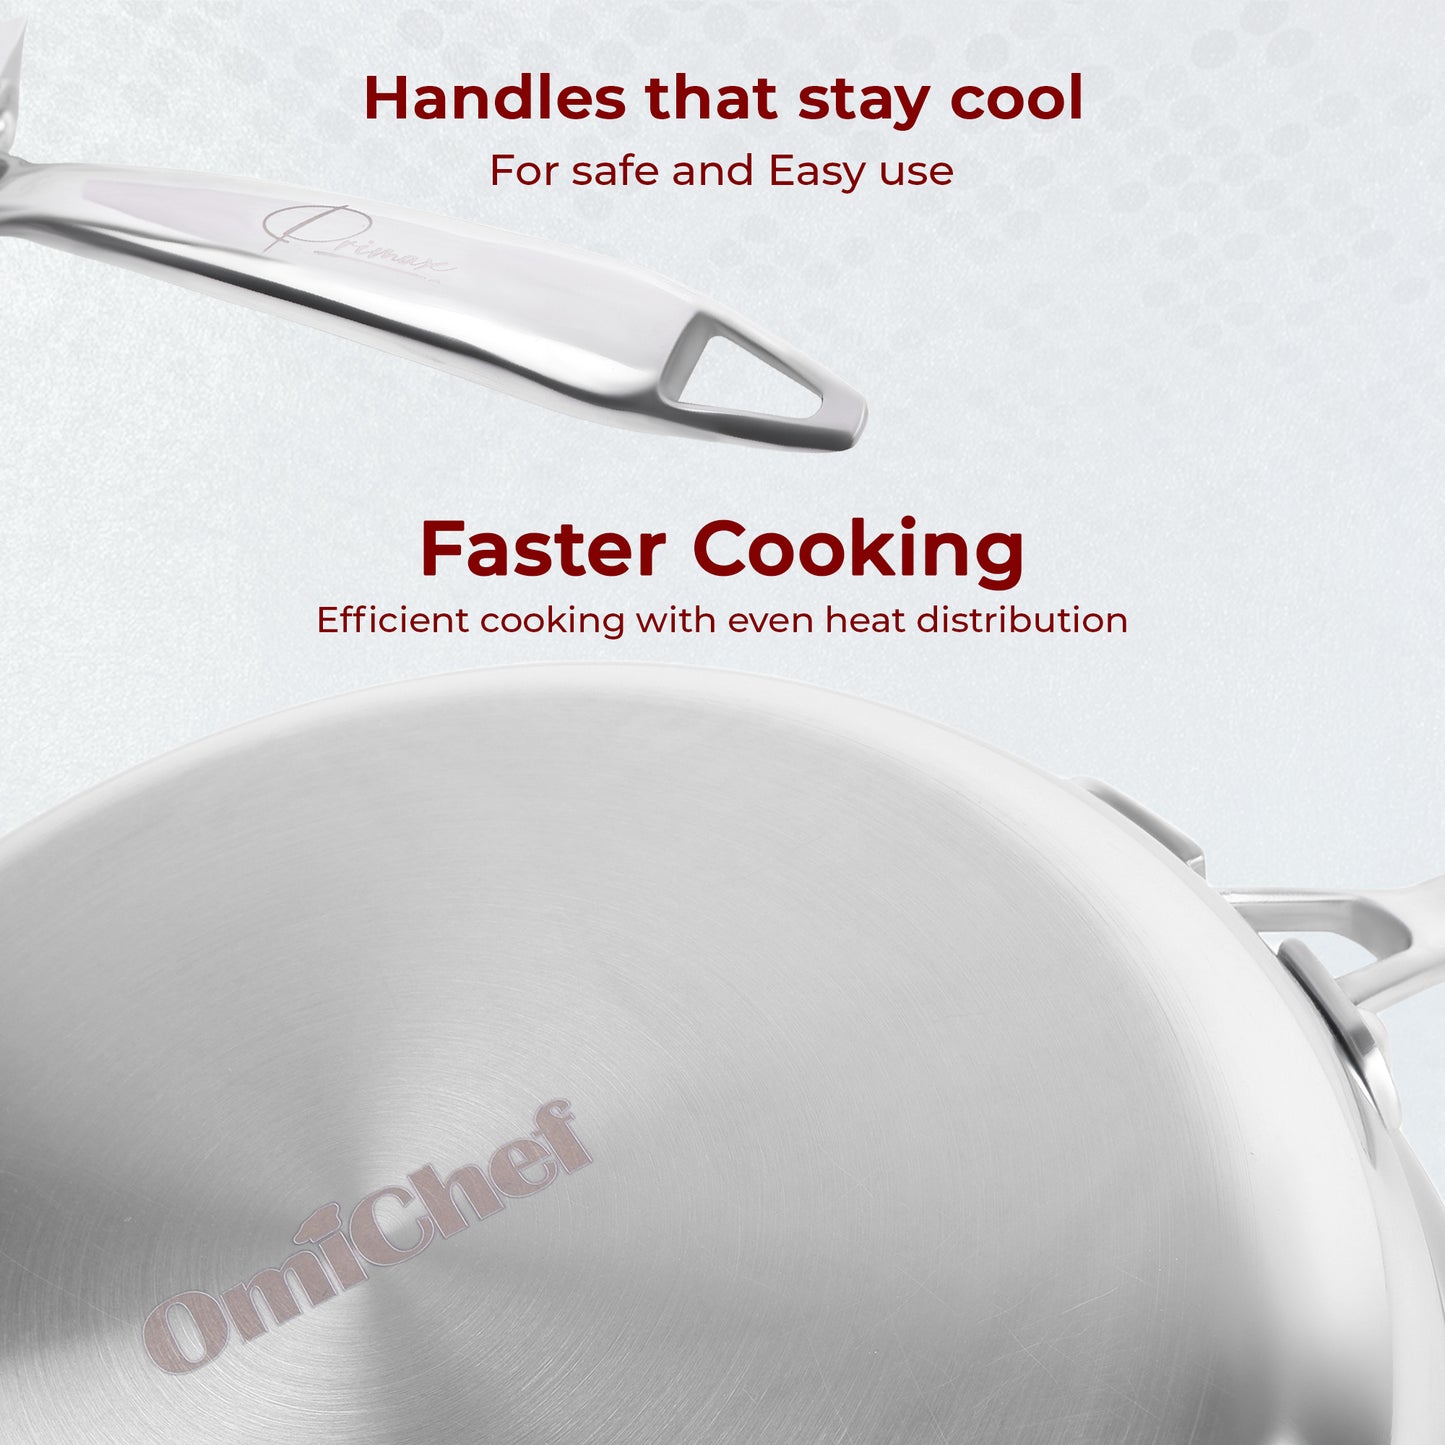 Omichef Triply Stainless Steel Frypan With Lid, 22 CM, Capacity 1.4 Litre